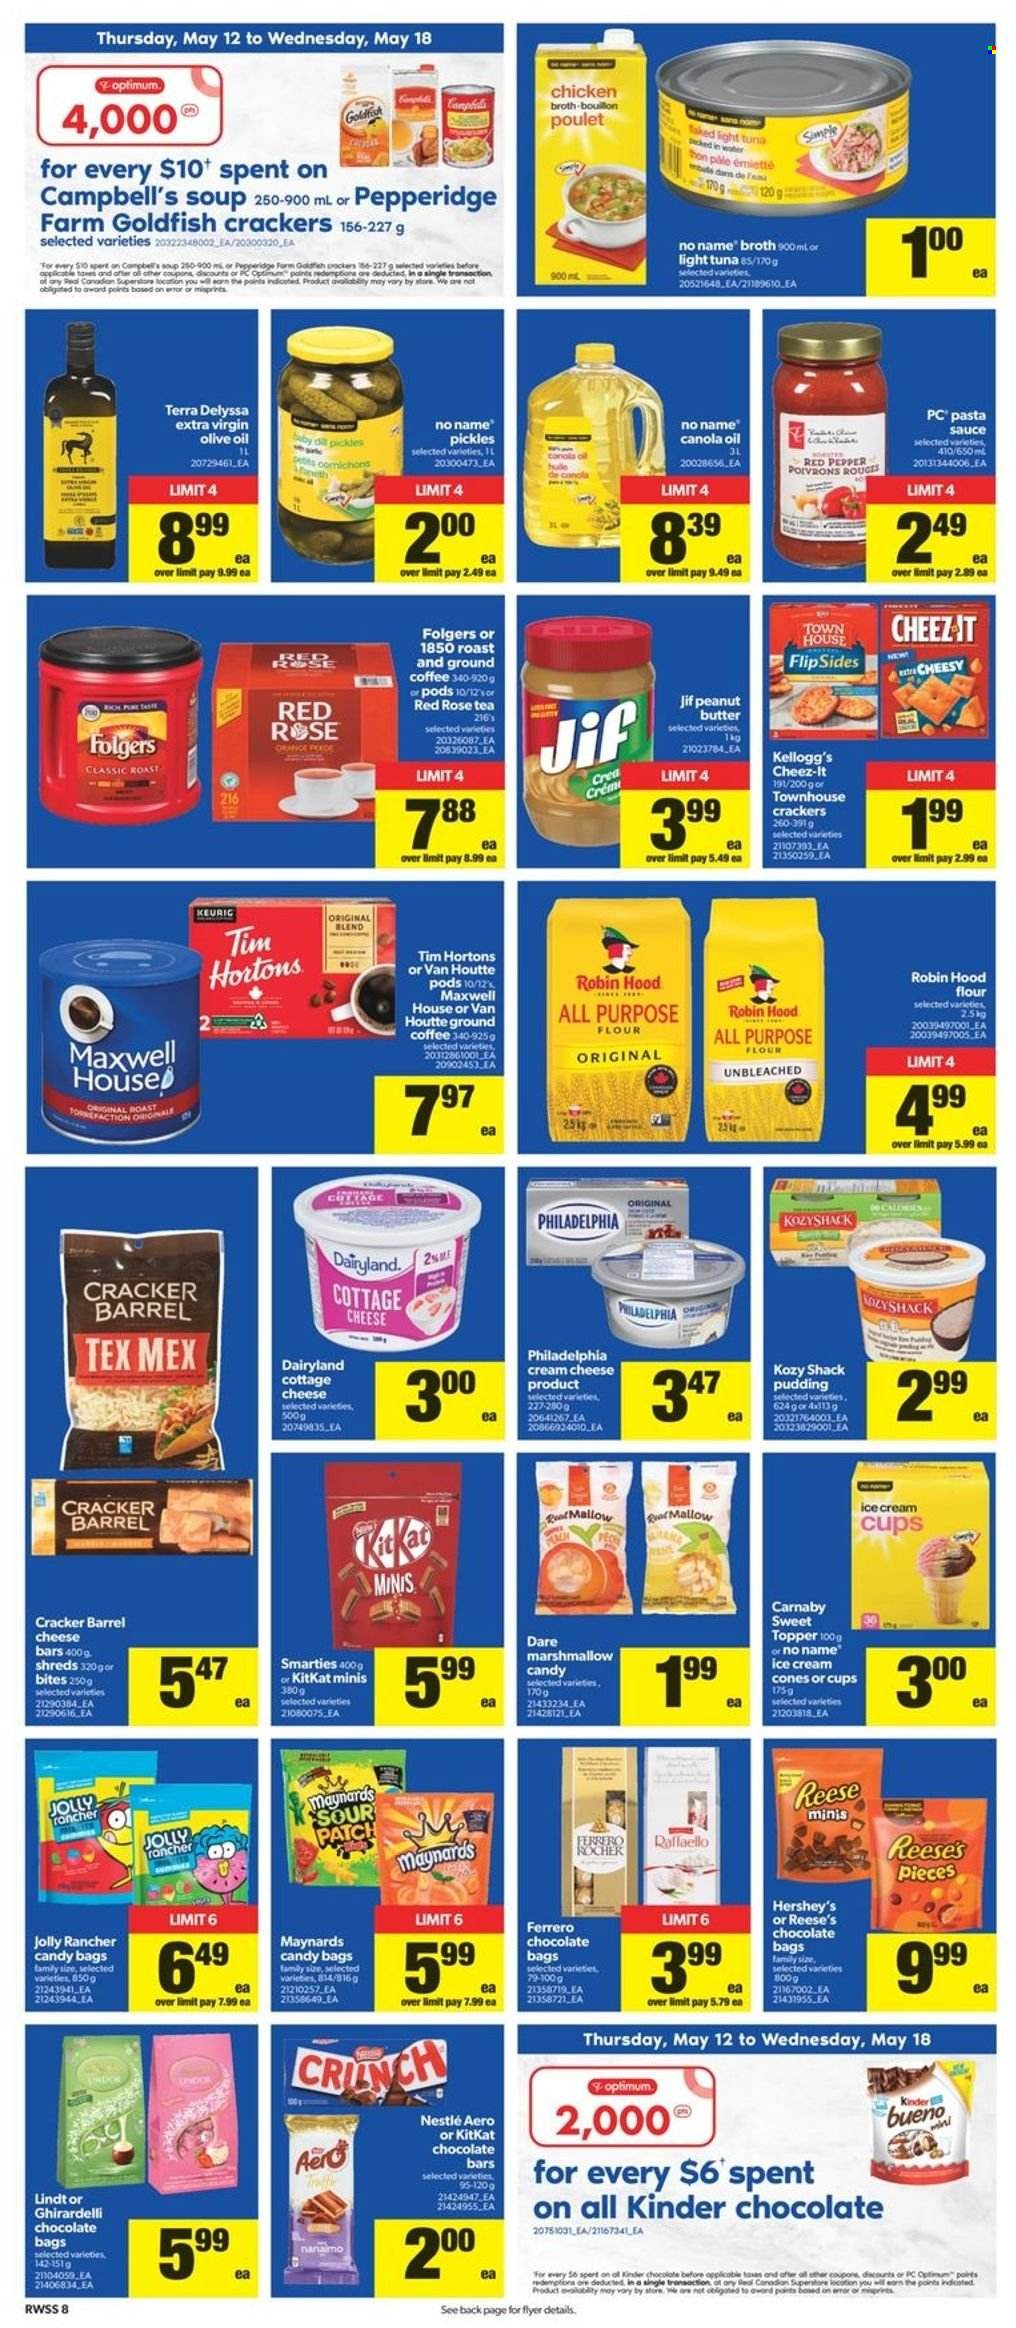 thumbnail - Real Canadian Superstore Flyer - May 12, 2022 - May 18, 2022 - Sales products - tuna, No Name, Campbell's, soup, pasta, sauce, cottage cheese, cream cheese, cheese, pudding, ice cream, Reese's, Hershey's, marshmallows, KitKat, crackers, Kellogg's, Ghirardelli, Sour Patch, chocolate bar, Goldfish, Cheez-It, bouillon, flour, chicken broth, broth, pickles, light tuna, canola oil, extra virgin olive oil, olive oil, oil, peanut butter, Jif, tea, coffee, Folgers, ground coffee, Keurig, rosé wine, cup, topper, Optimum, rose, Nestlé, Philadelphia, Lindt, Ferrero Rocher, Smarties. Page 9.